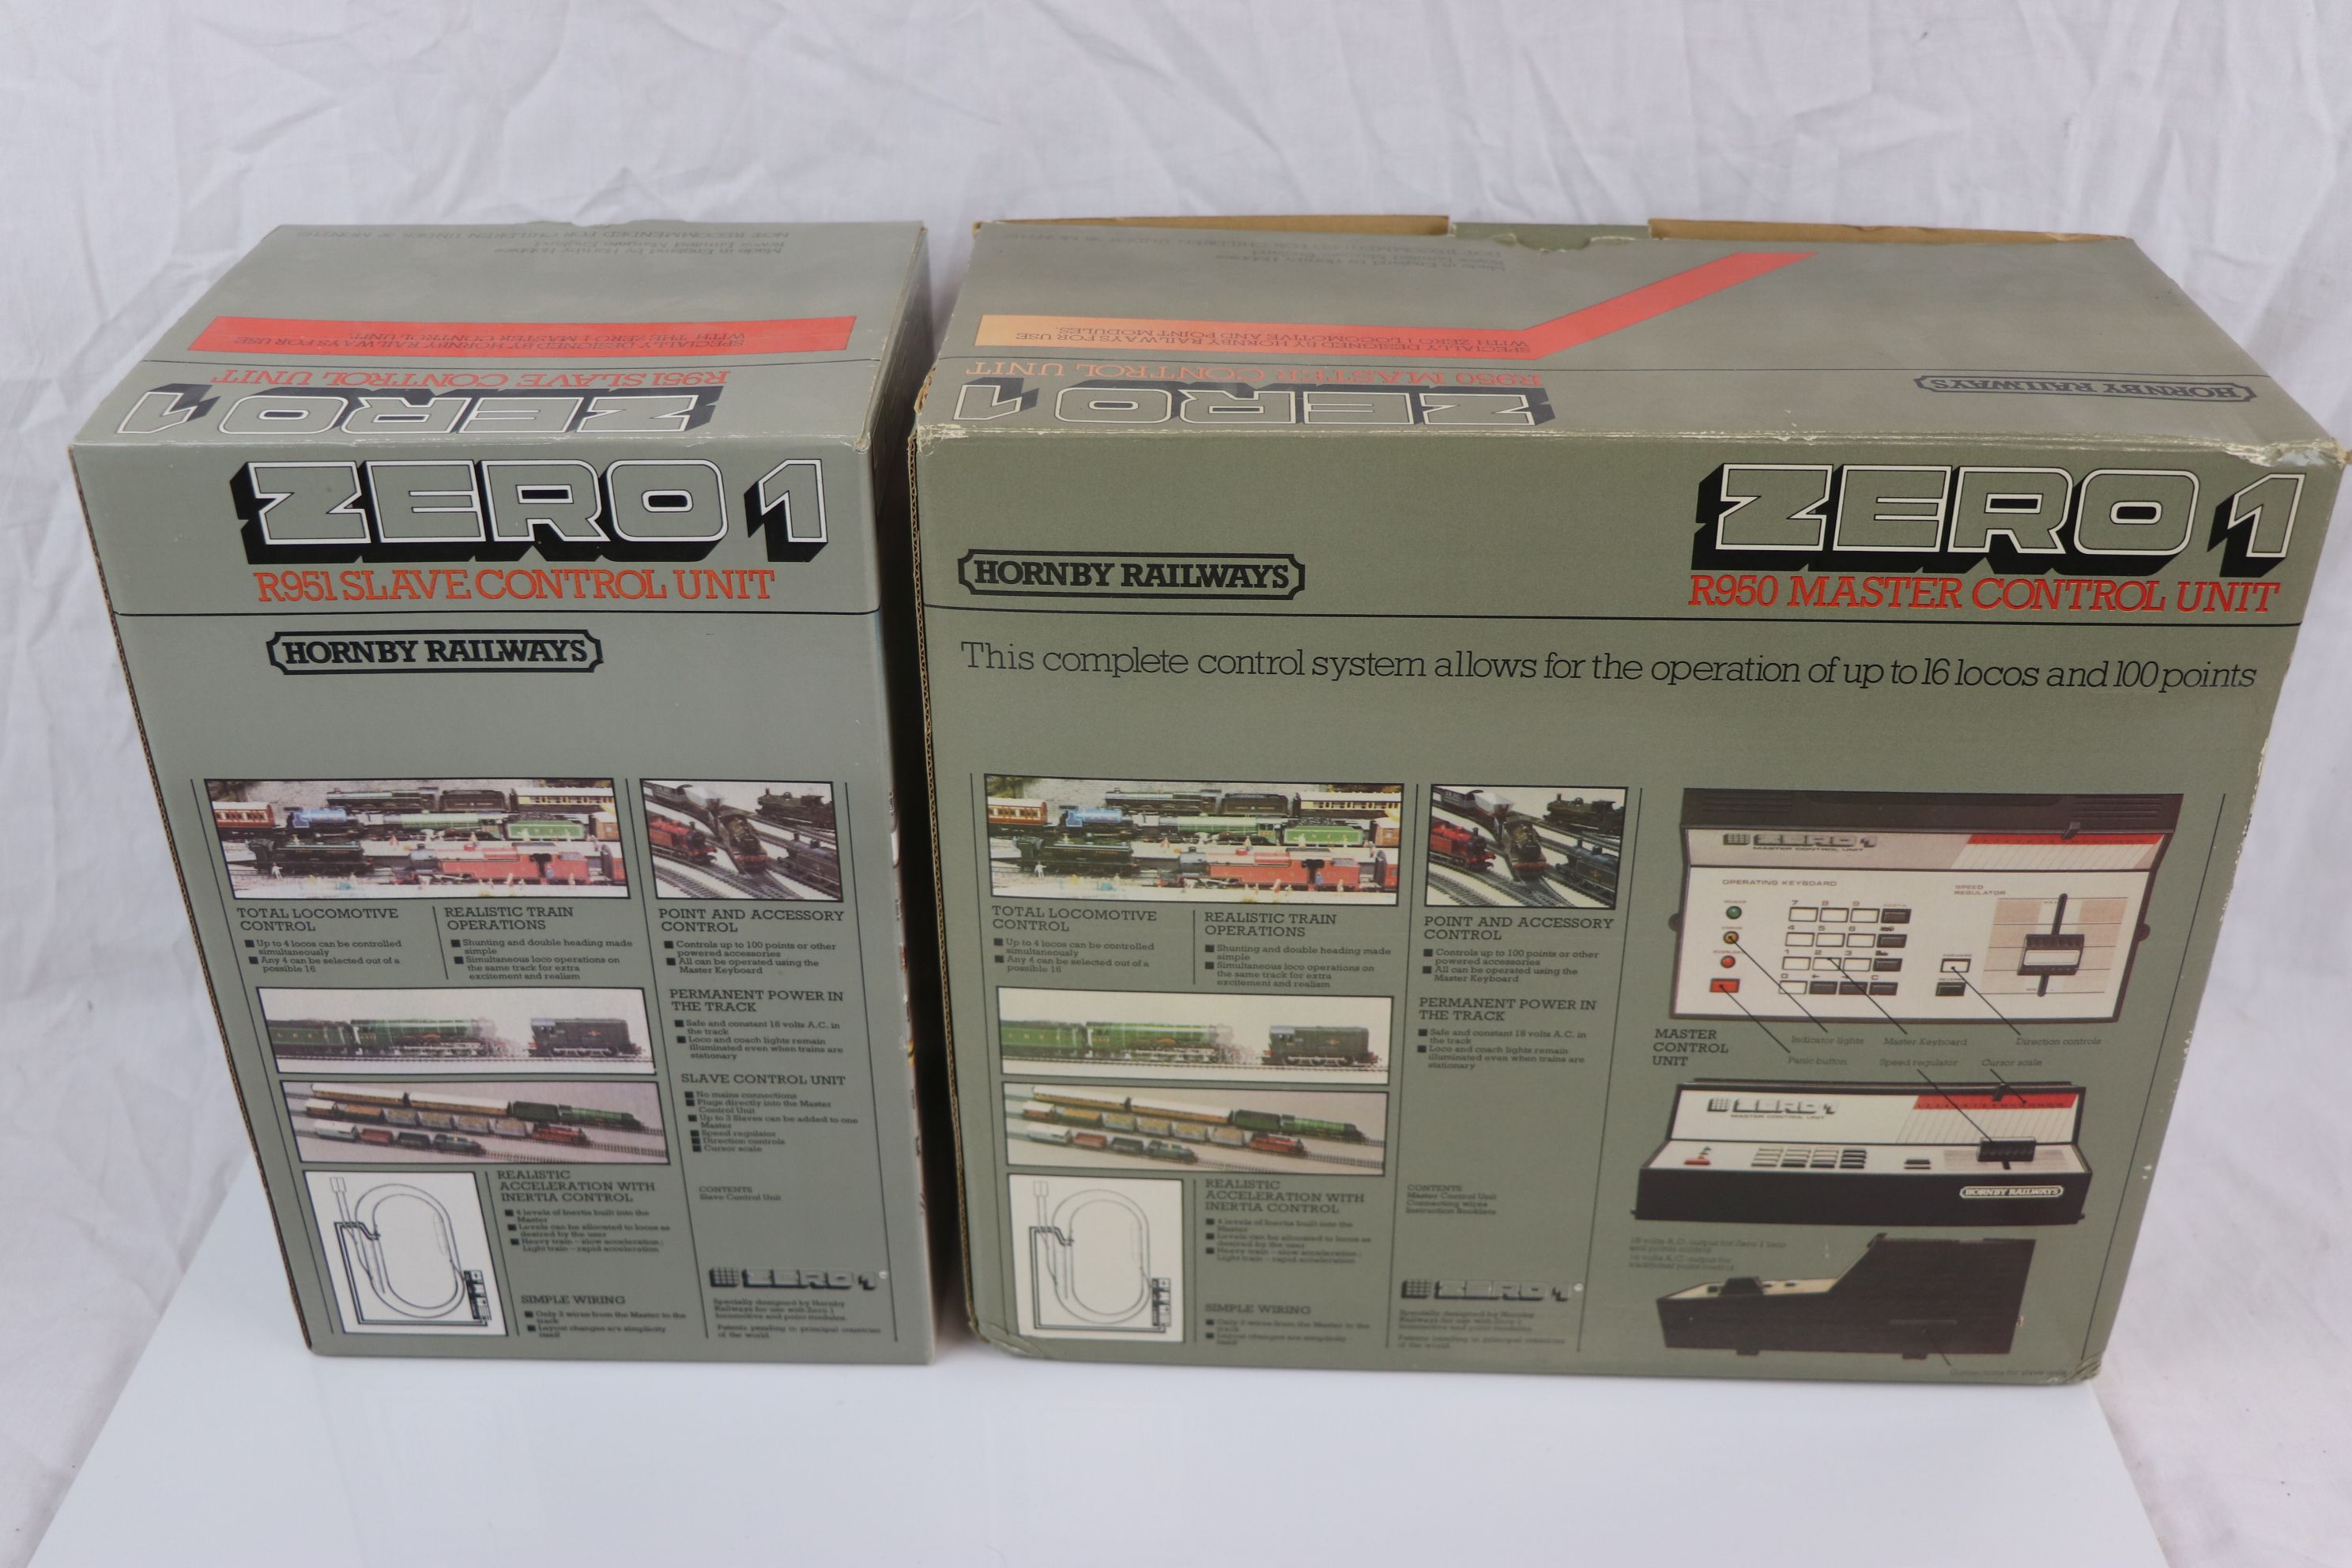 Boxed Hornby OO gauge Zero 1 R950 Master Control Unit and a boxed Zero I R951 Slave Control Unit ( - Image 6 of 6